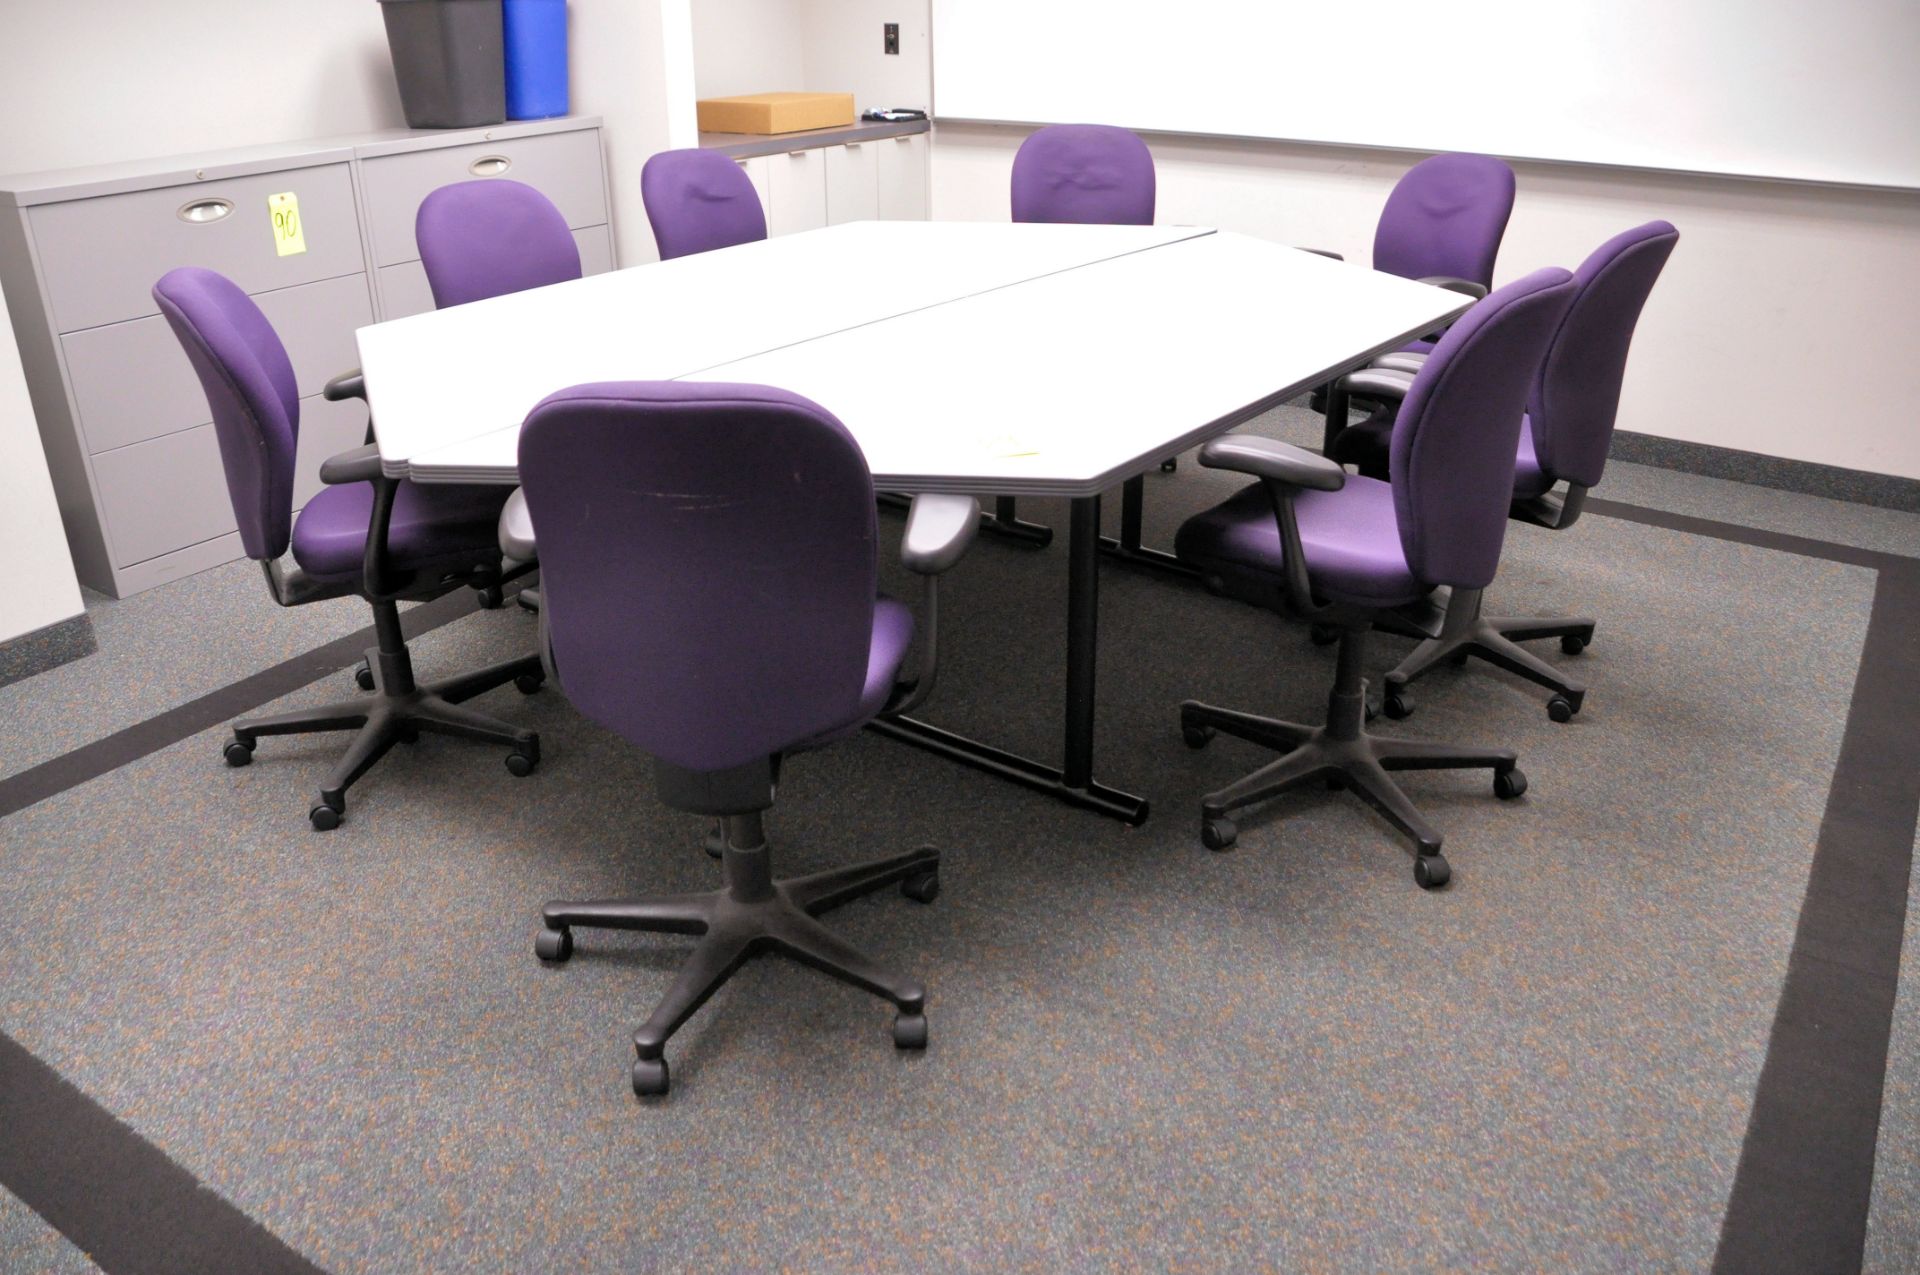 Lot-(1) 2-Piece 106" x 72" 6-Sided Conference Table with (9) Swivel Office Chairs, (Located 1st